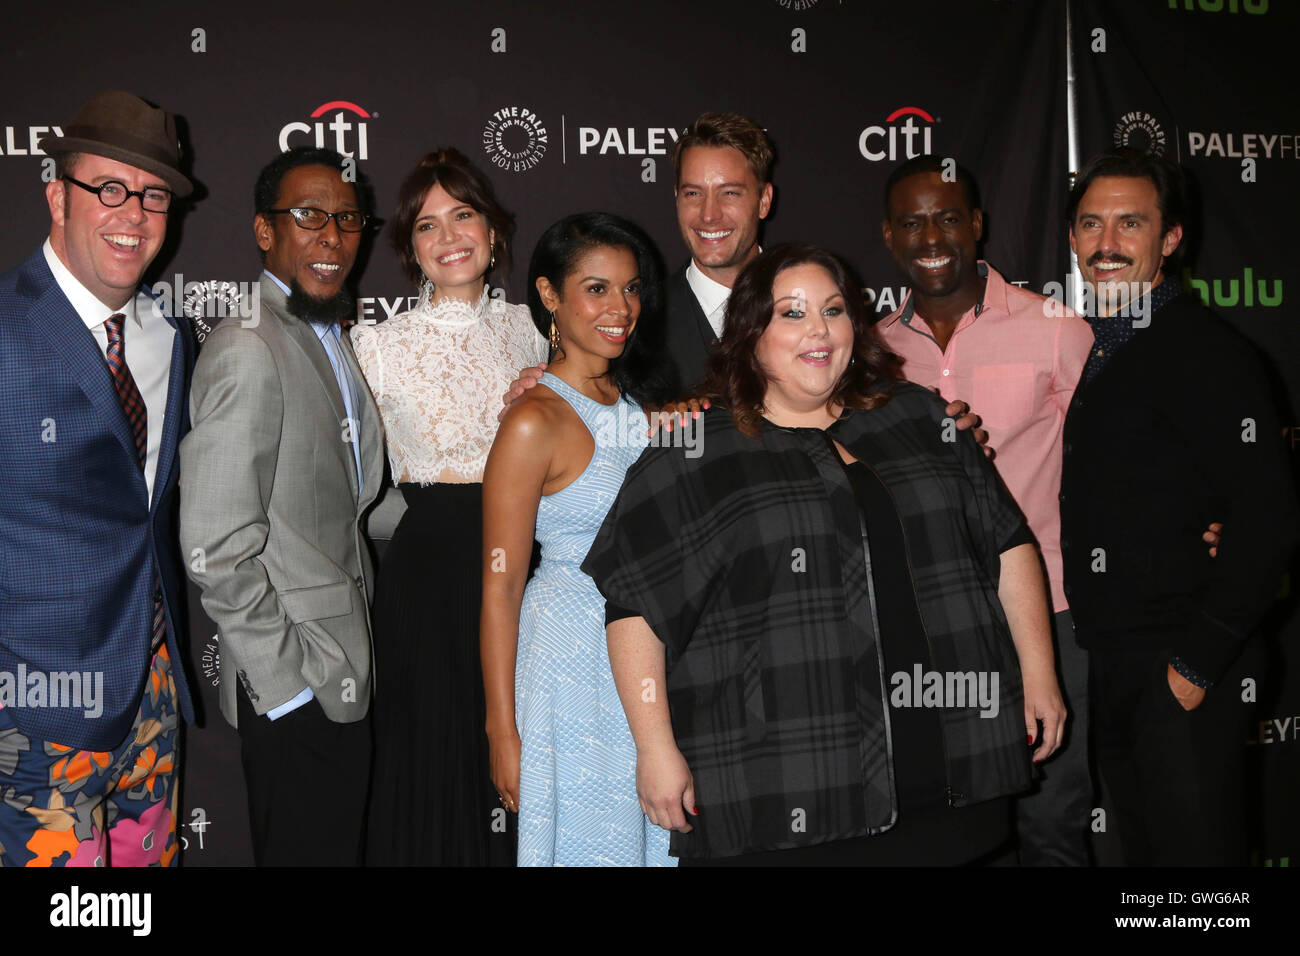 BEVERLY HILLS, CA - SEPTEMBER 13: Chris Sullivan, Ron Cephas Jones, Mandy Moore, Susan Kelechi Watson, Justin Hartley, Chrissy Metz, Sterling K. Brown, Milo Ventimiglia at the PaleyFest 2016 Fall TV Preview featuring NBC at the Paley Center For Media in Beverly Hills, California on September 13, 2016. Credit: David Edwards/MediaPunch Stock Photo